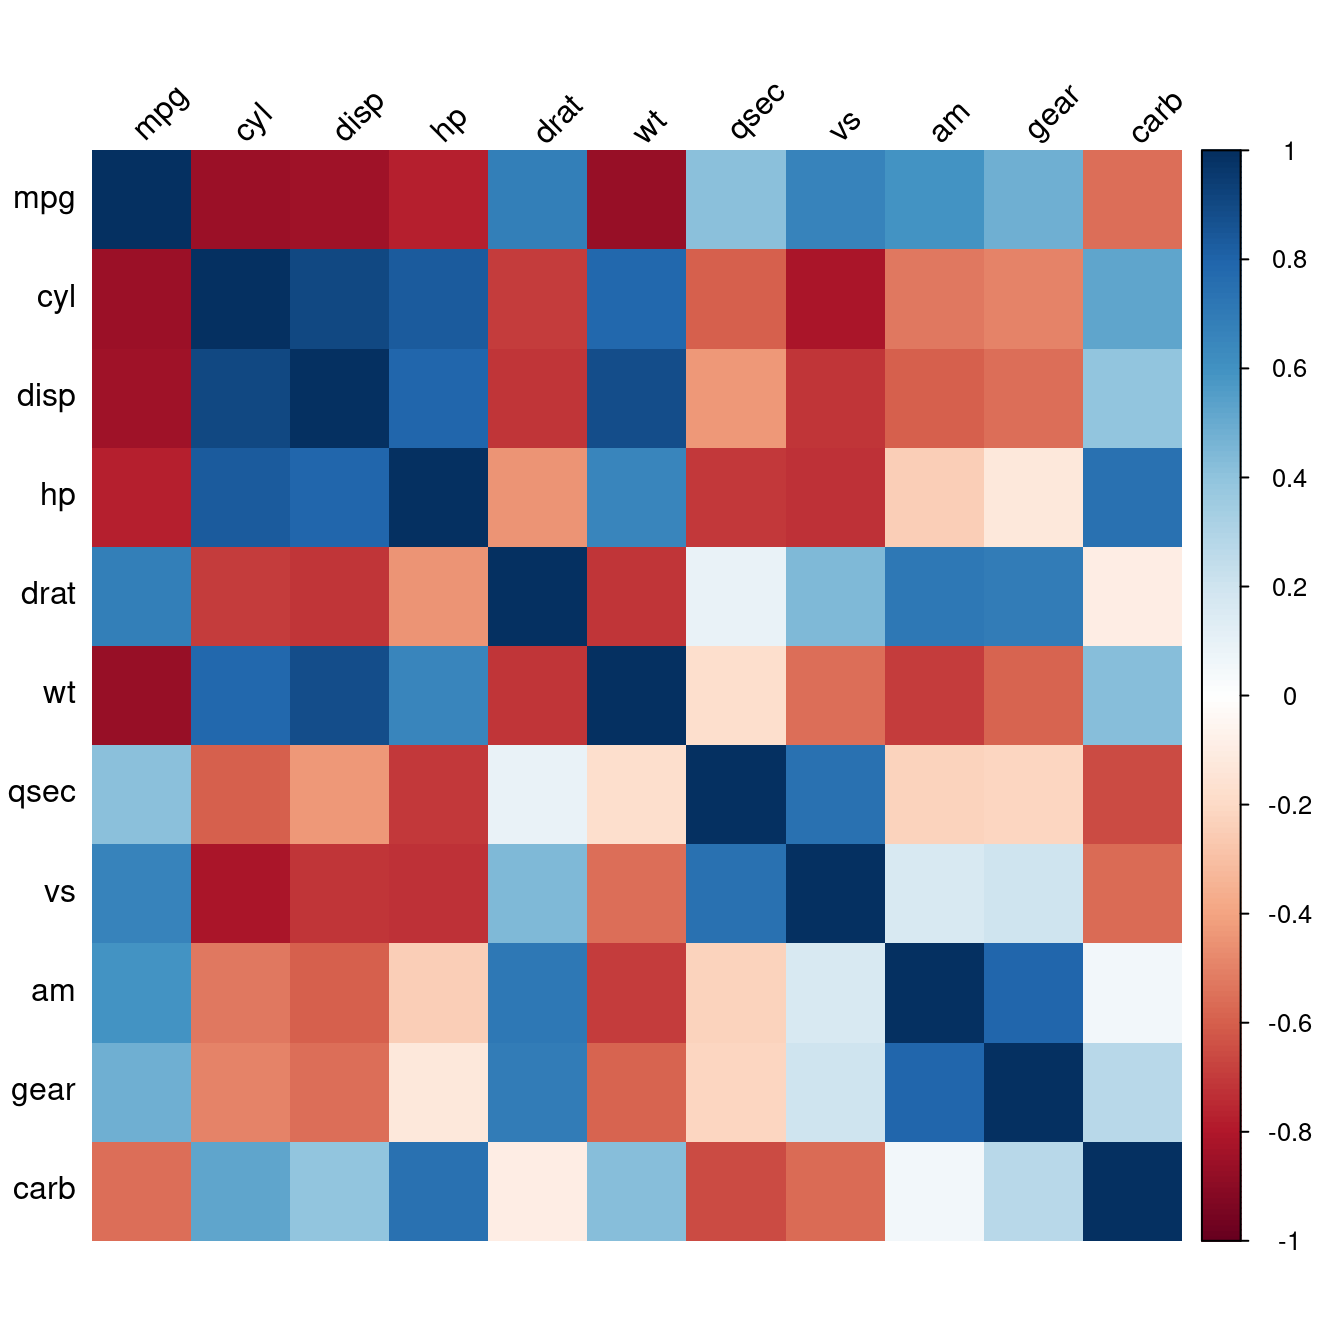 Correlation matrix with colored squares and black, rotated labels